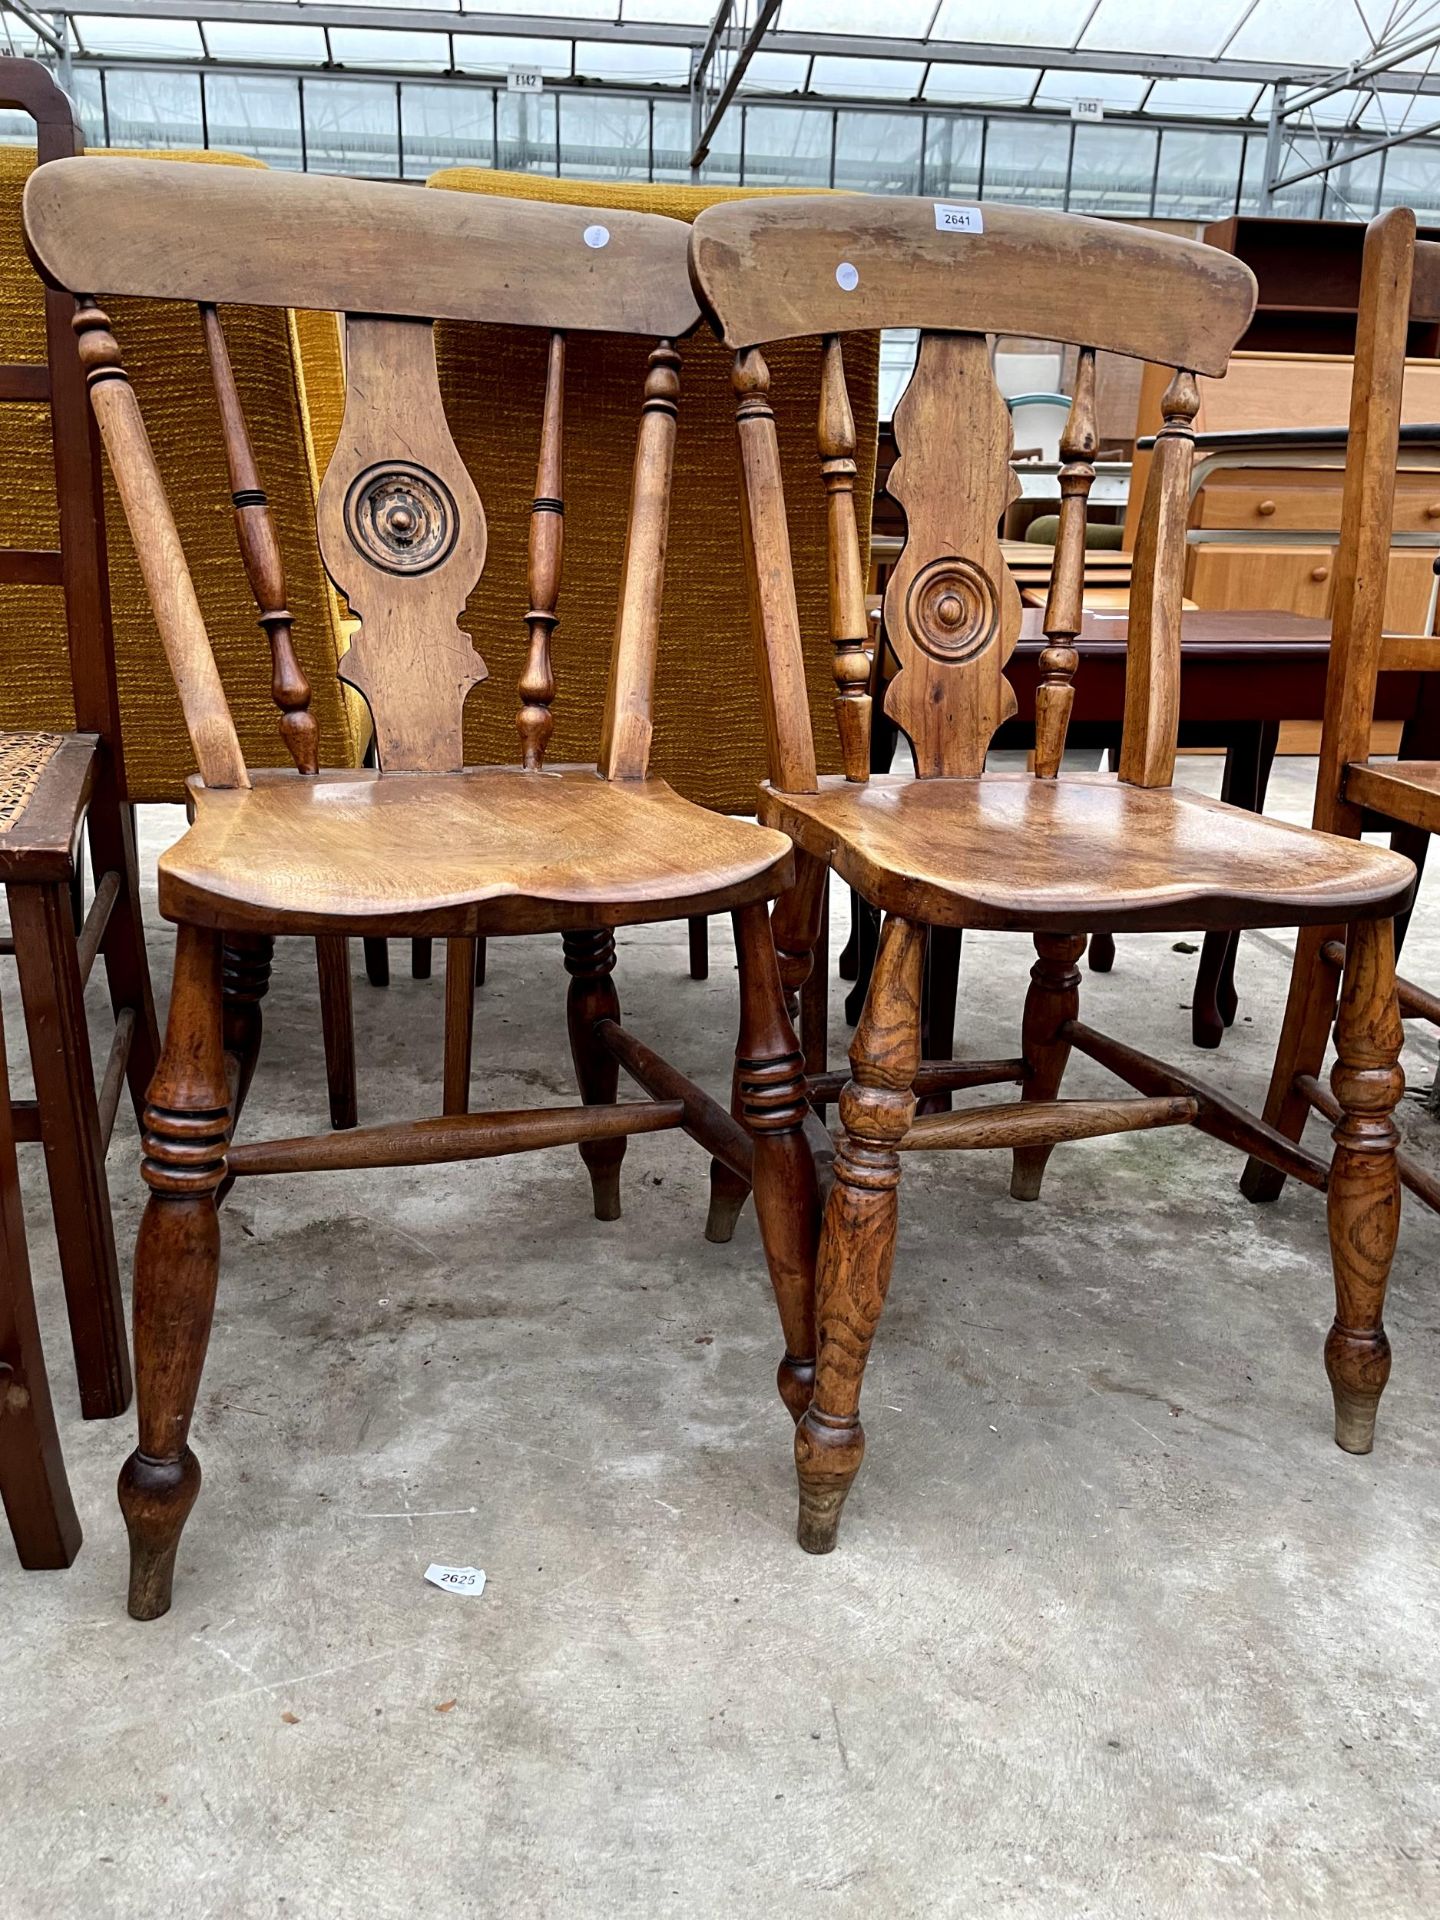 A PAIR OF VICTORIAN ELM AND BEECH KITCHEN CHAIRS WITH BULLSEYE BACKS - Image 2 of 2